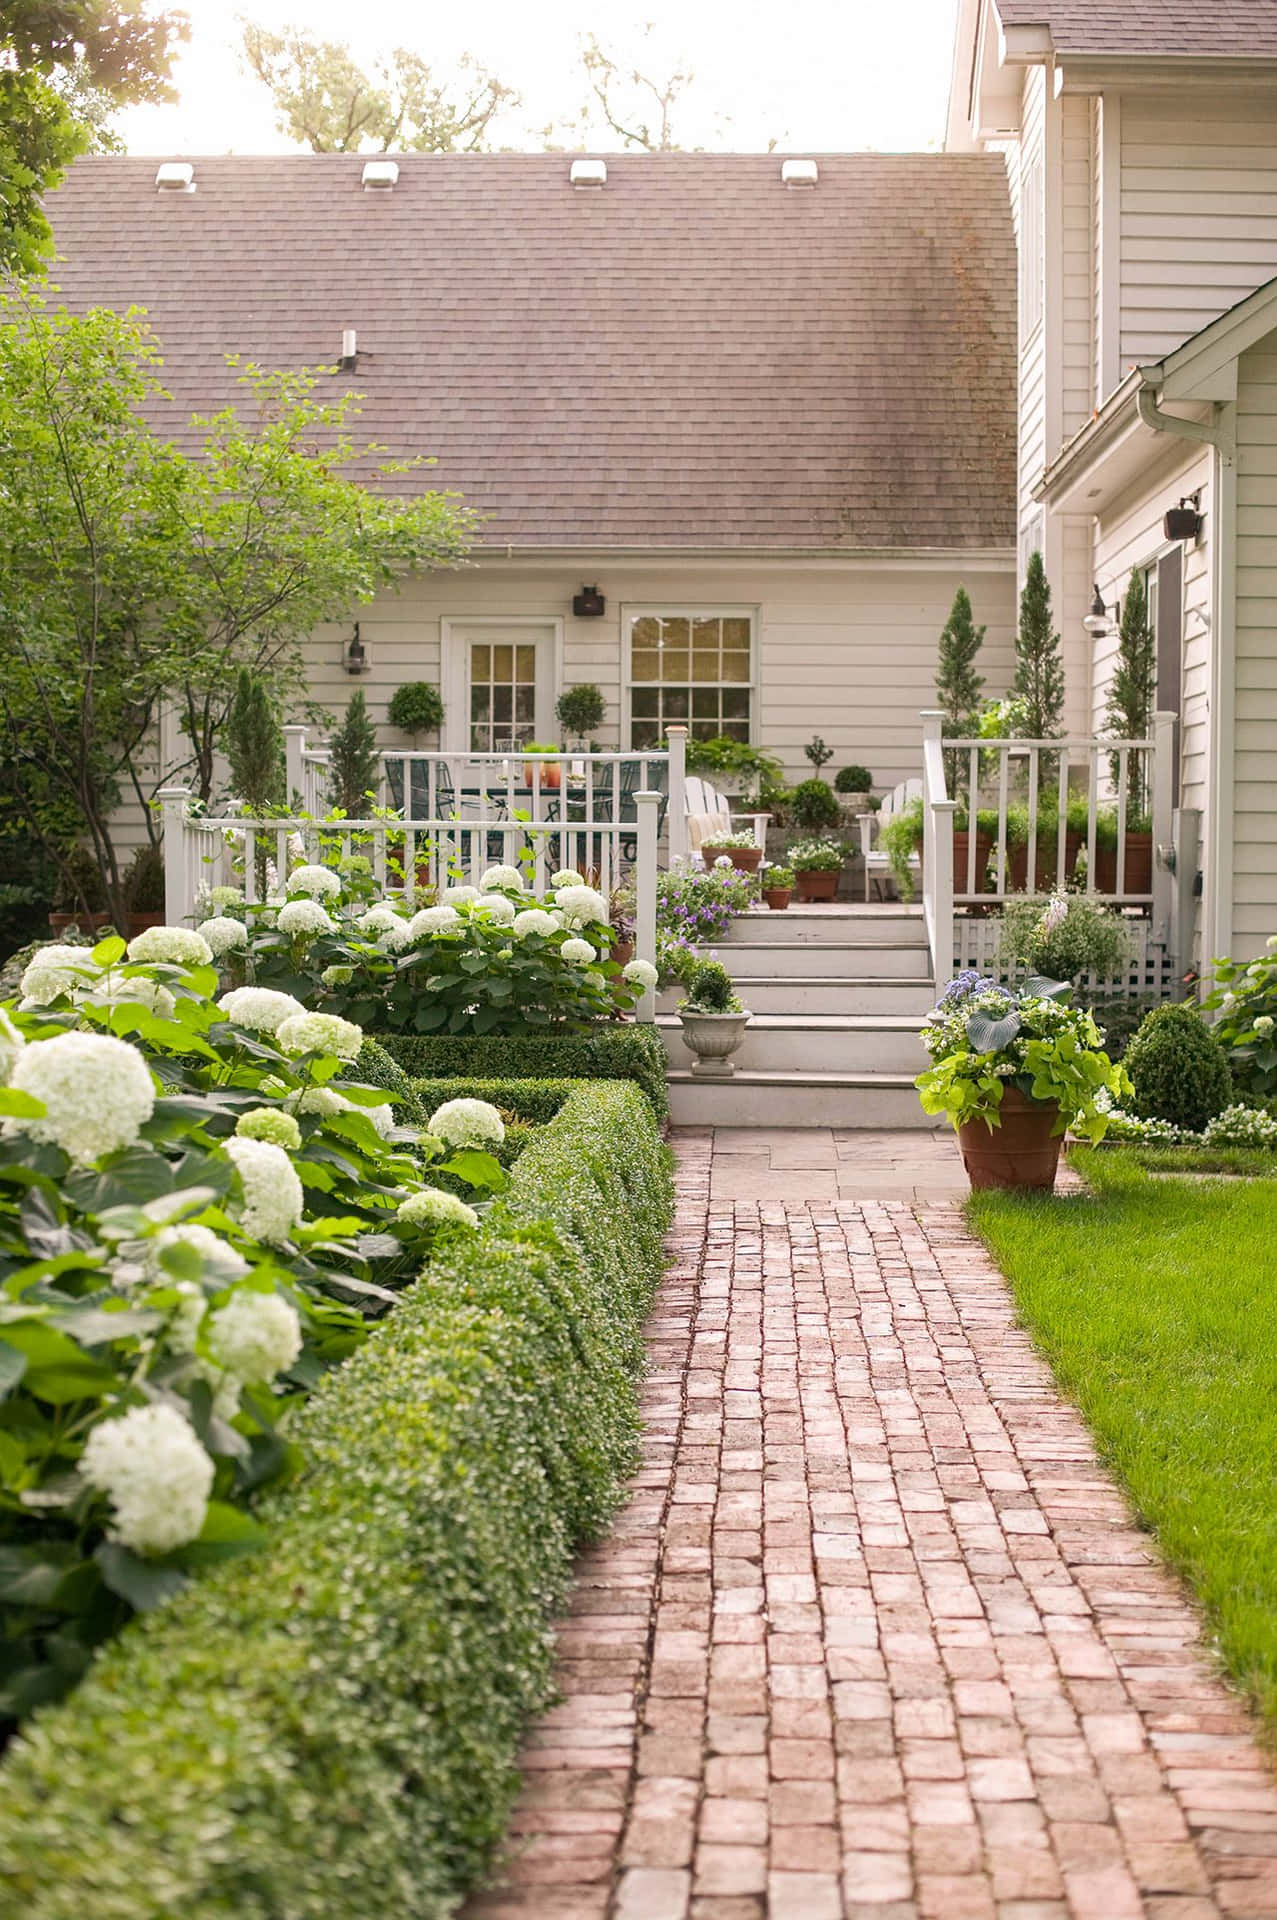 A Brick Walkway Leading To A House With A Garden